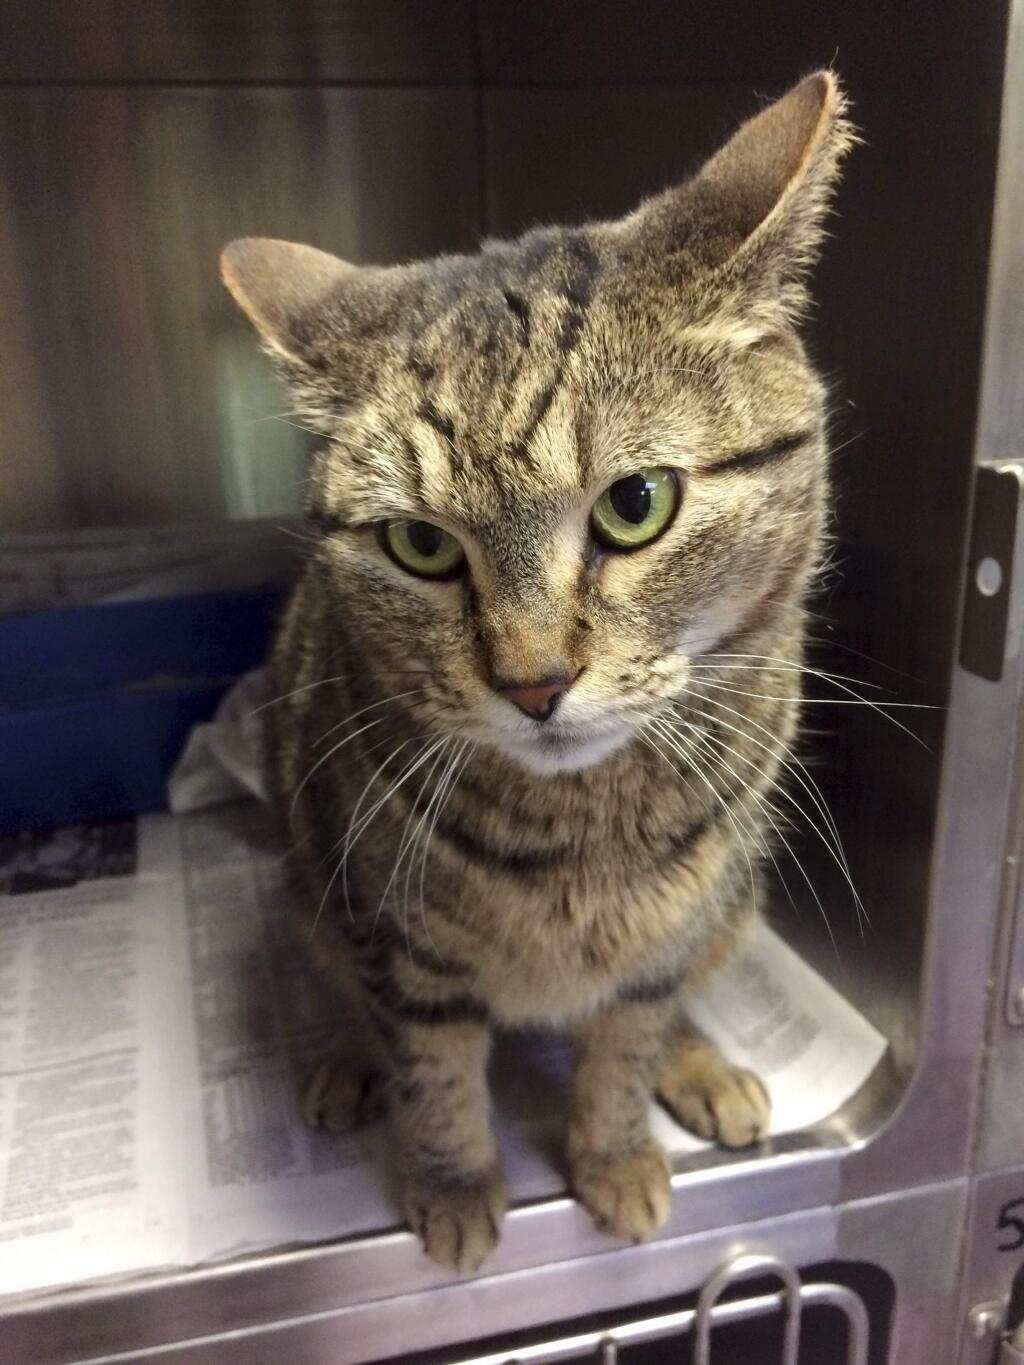 This March, 2017 photo provided by the Guelph Humane Society shows BooBoo at the organization's facility in Guelph, near Toronto in Ontario, Canada. BooBoo had gone missing from her home in Watsonville, Calif., in August, 2014. The brown tabby showed up in southeastern Canada, about 3,000 miles from home, last week. How the missing cat got to Canada remains a mystery. (Guelph Humane Society via AP)